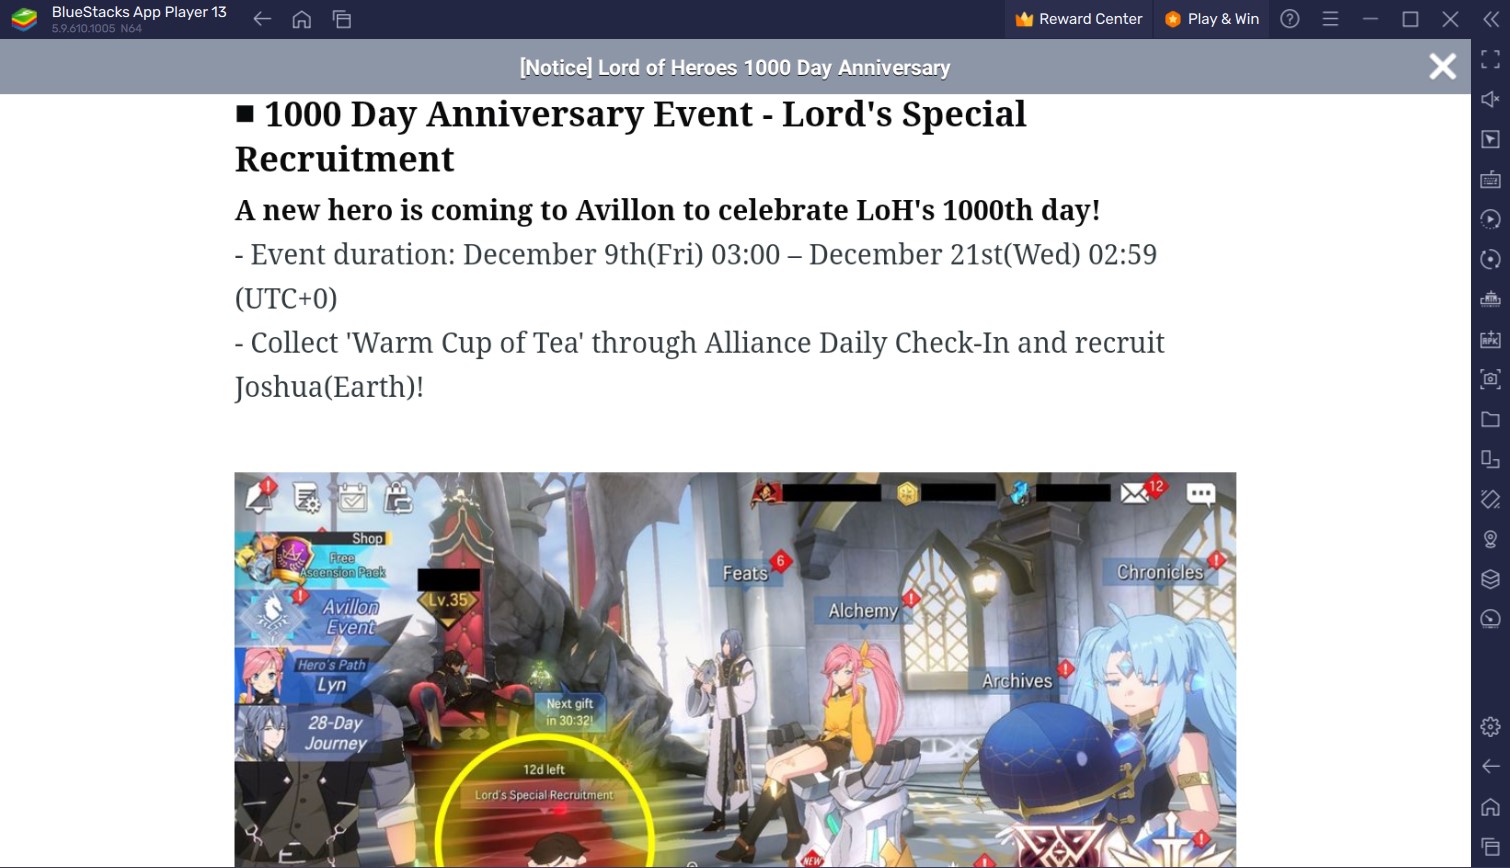 Lord of Heroes 1000th Day Anniversary – Free New Hero Earth Joshua and Lord’s Recruitment Event